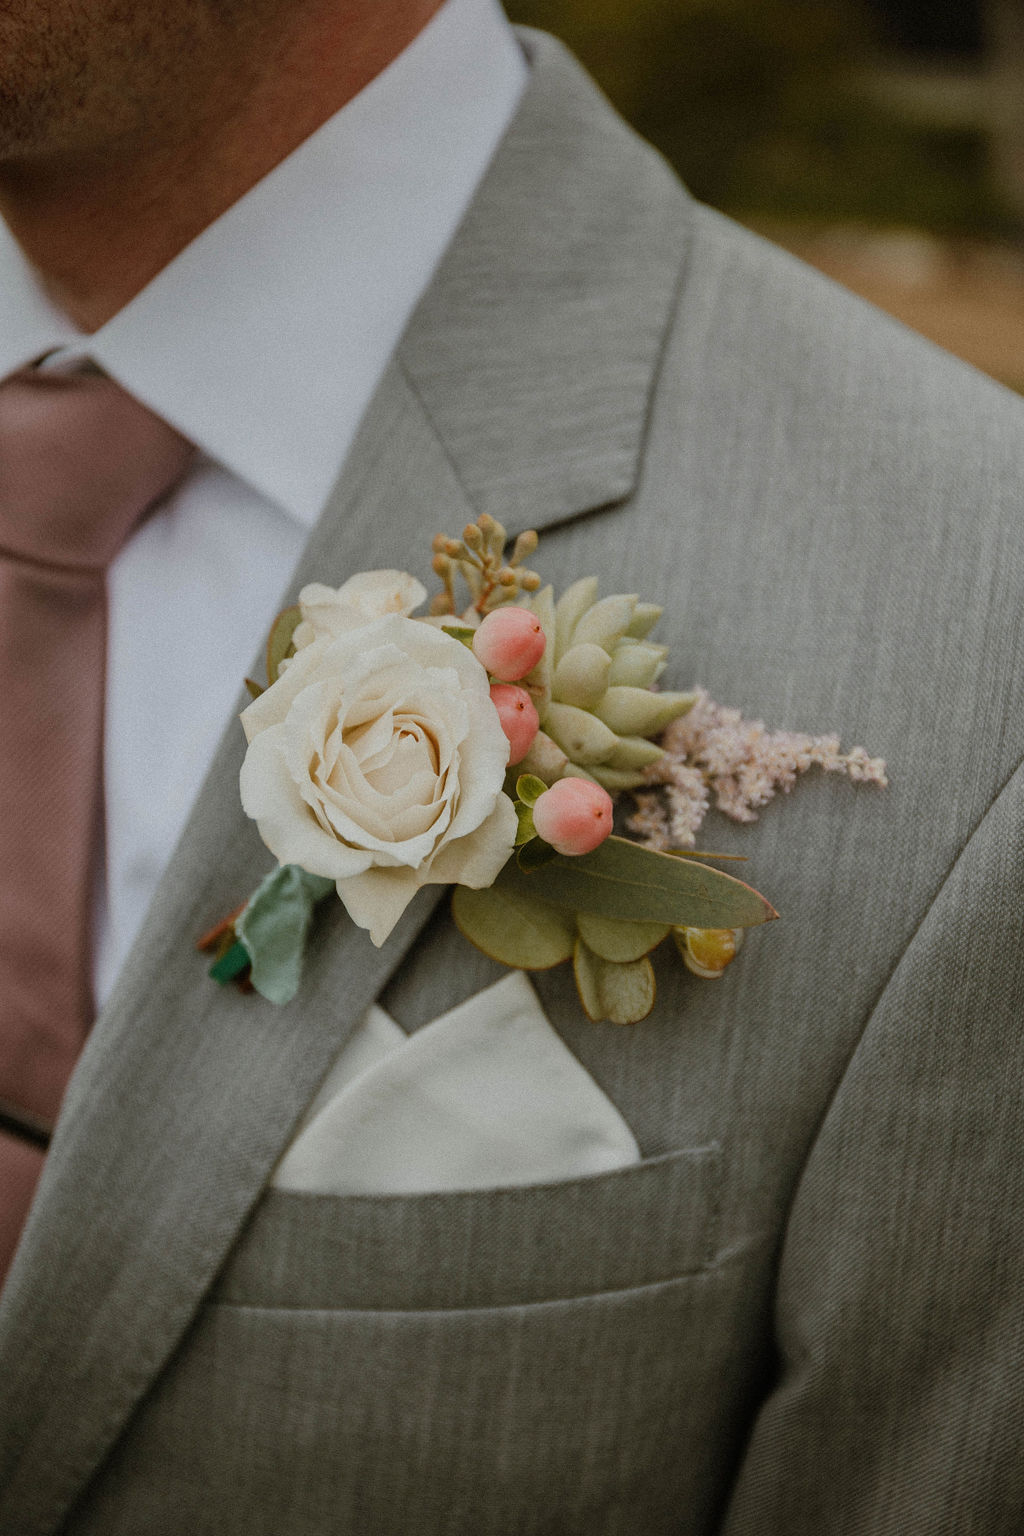 the boutonniere for the groom